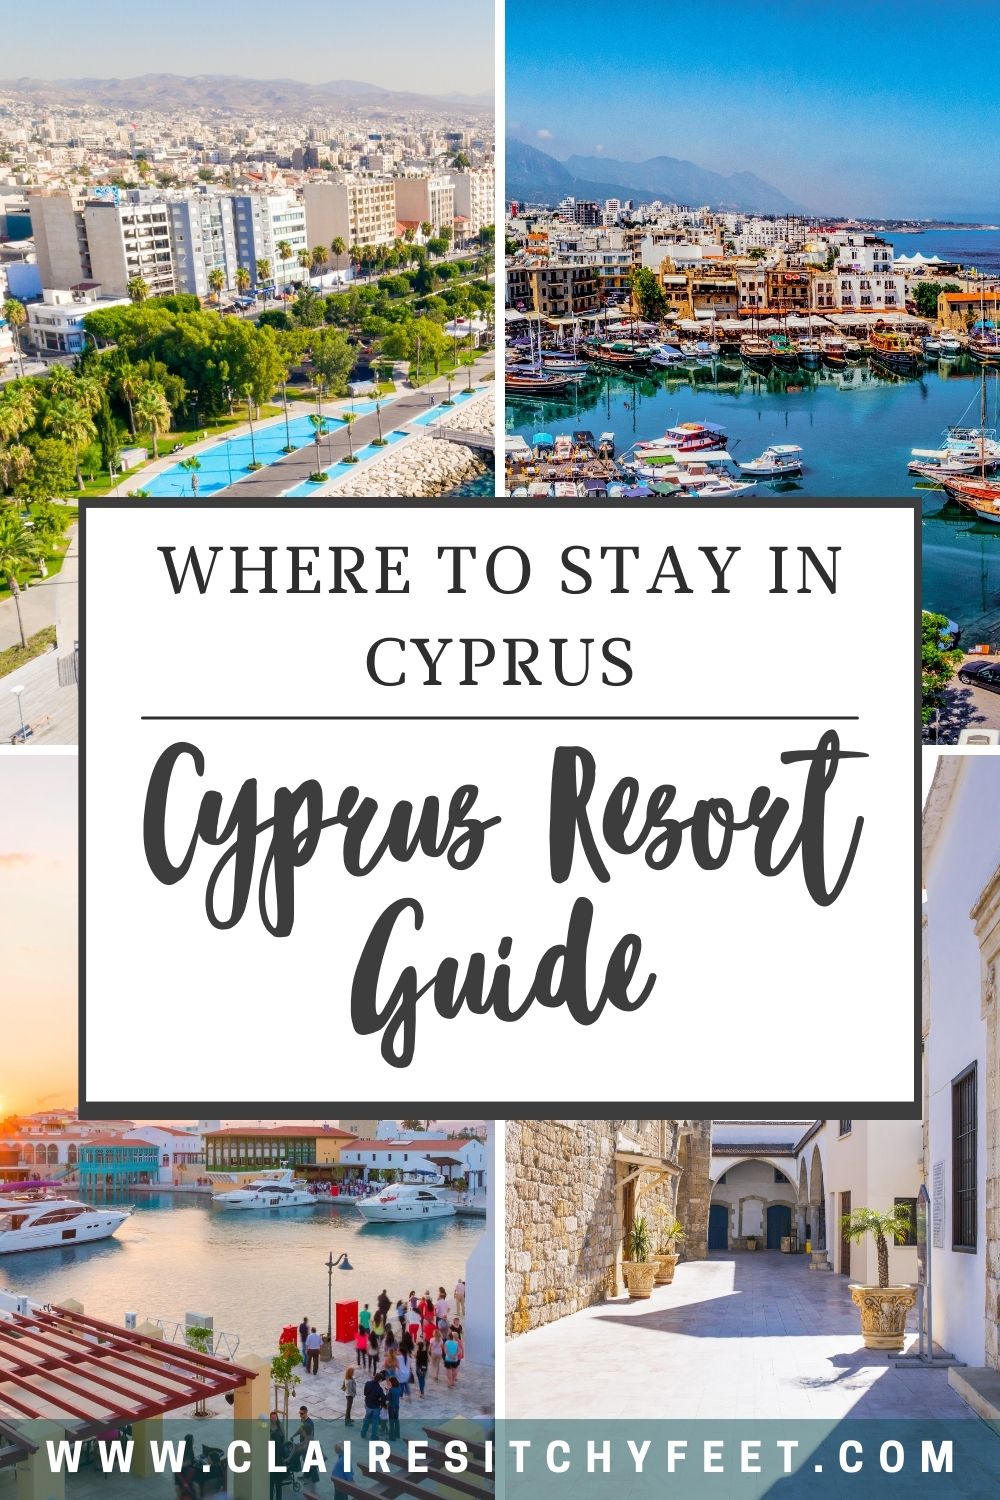 Where to stay in Cyprus,cyprus,cyprus travel,stay in cyprus,pathos,larnaca,protaras